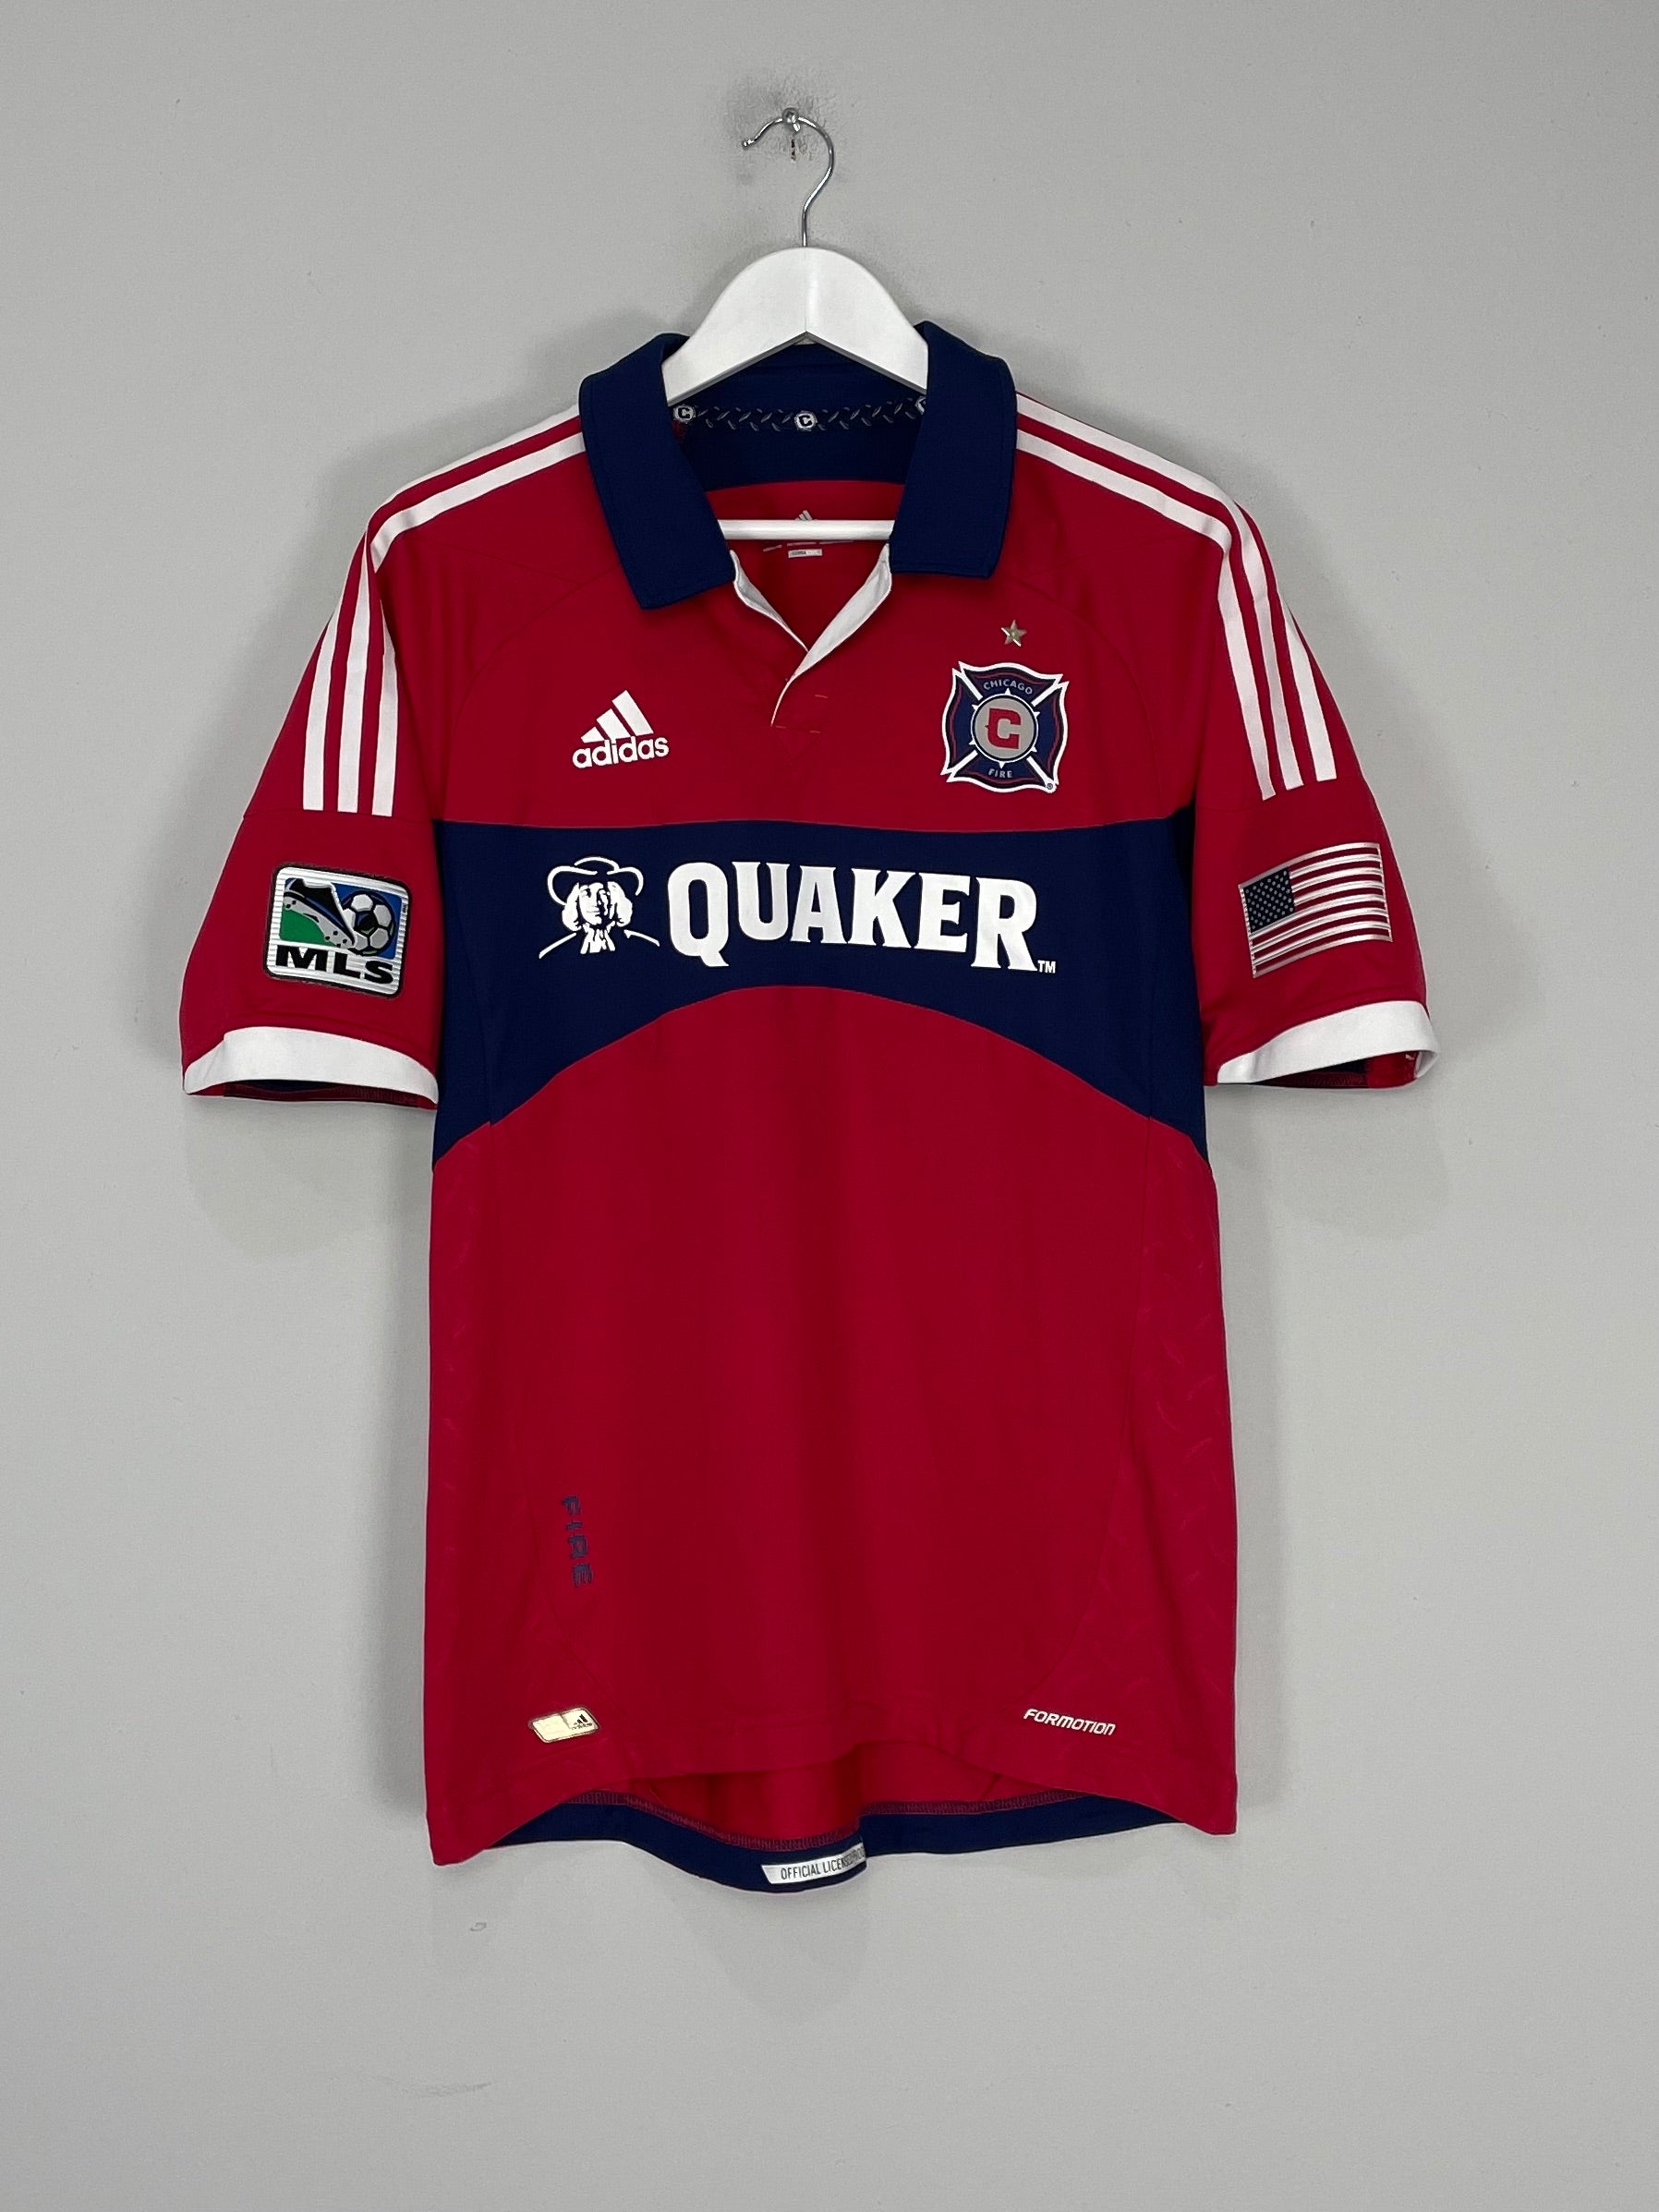 2012/13 CHICAGO FIRE *PLAYER ISSUE* HOME SHIRT (L) ADIDAS